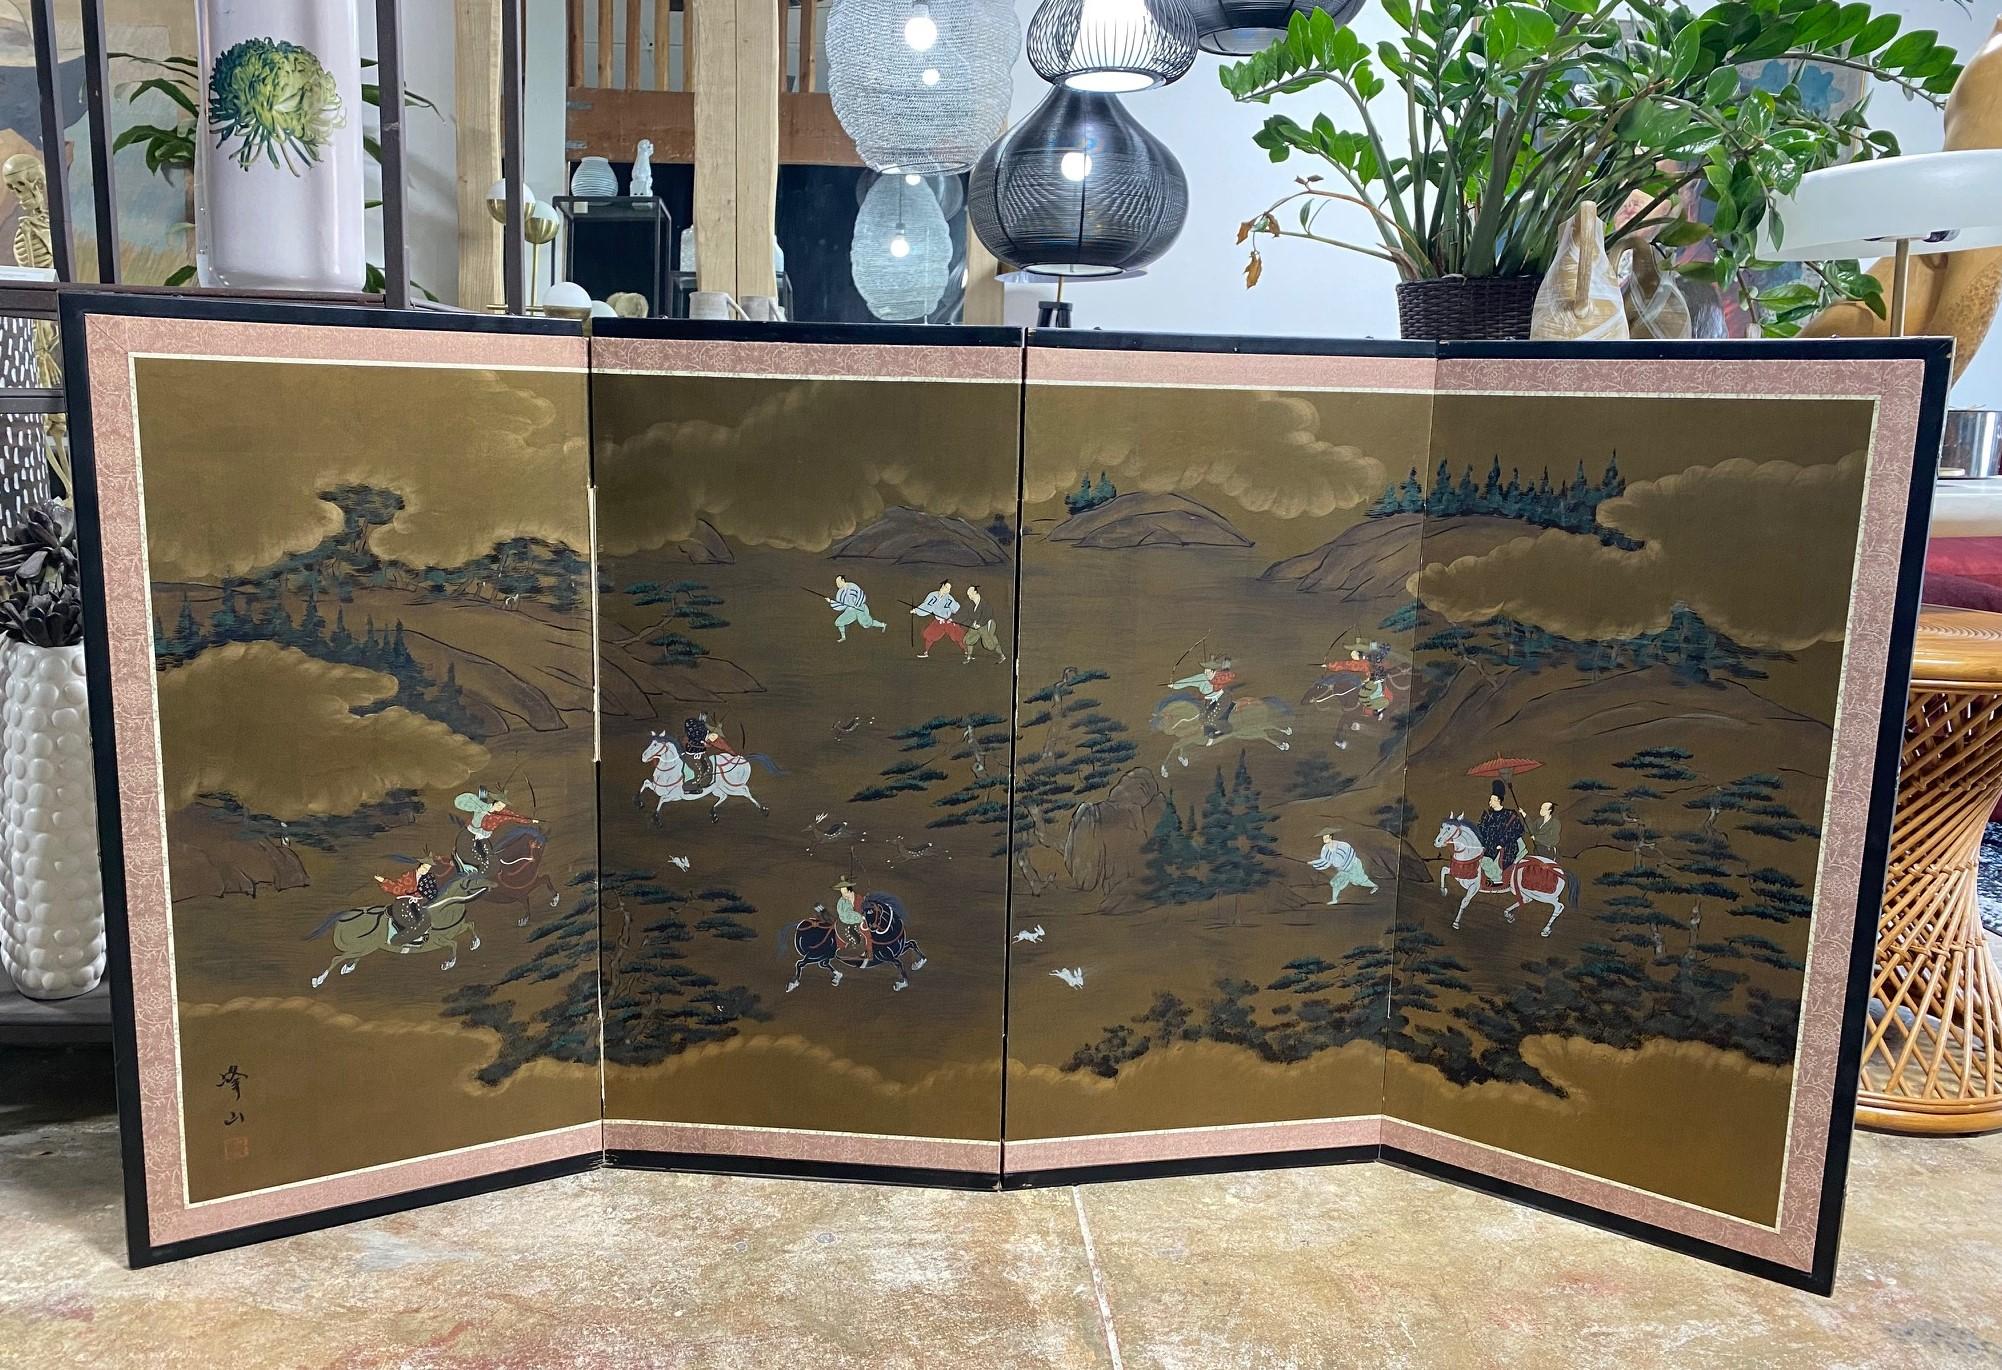 A gorgeous four-panel Japanese Byobu folding screen depicting a hunting scene with various warriors and animals spread across a vast, mountainous landscape with lush forest. The dark, rich colors, gold leaf, and beautiful hand-painted detail really